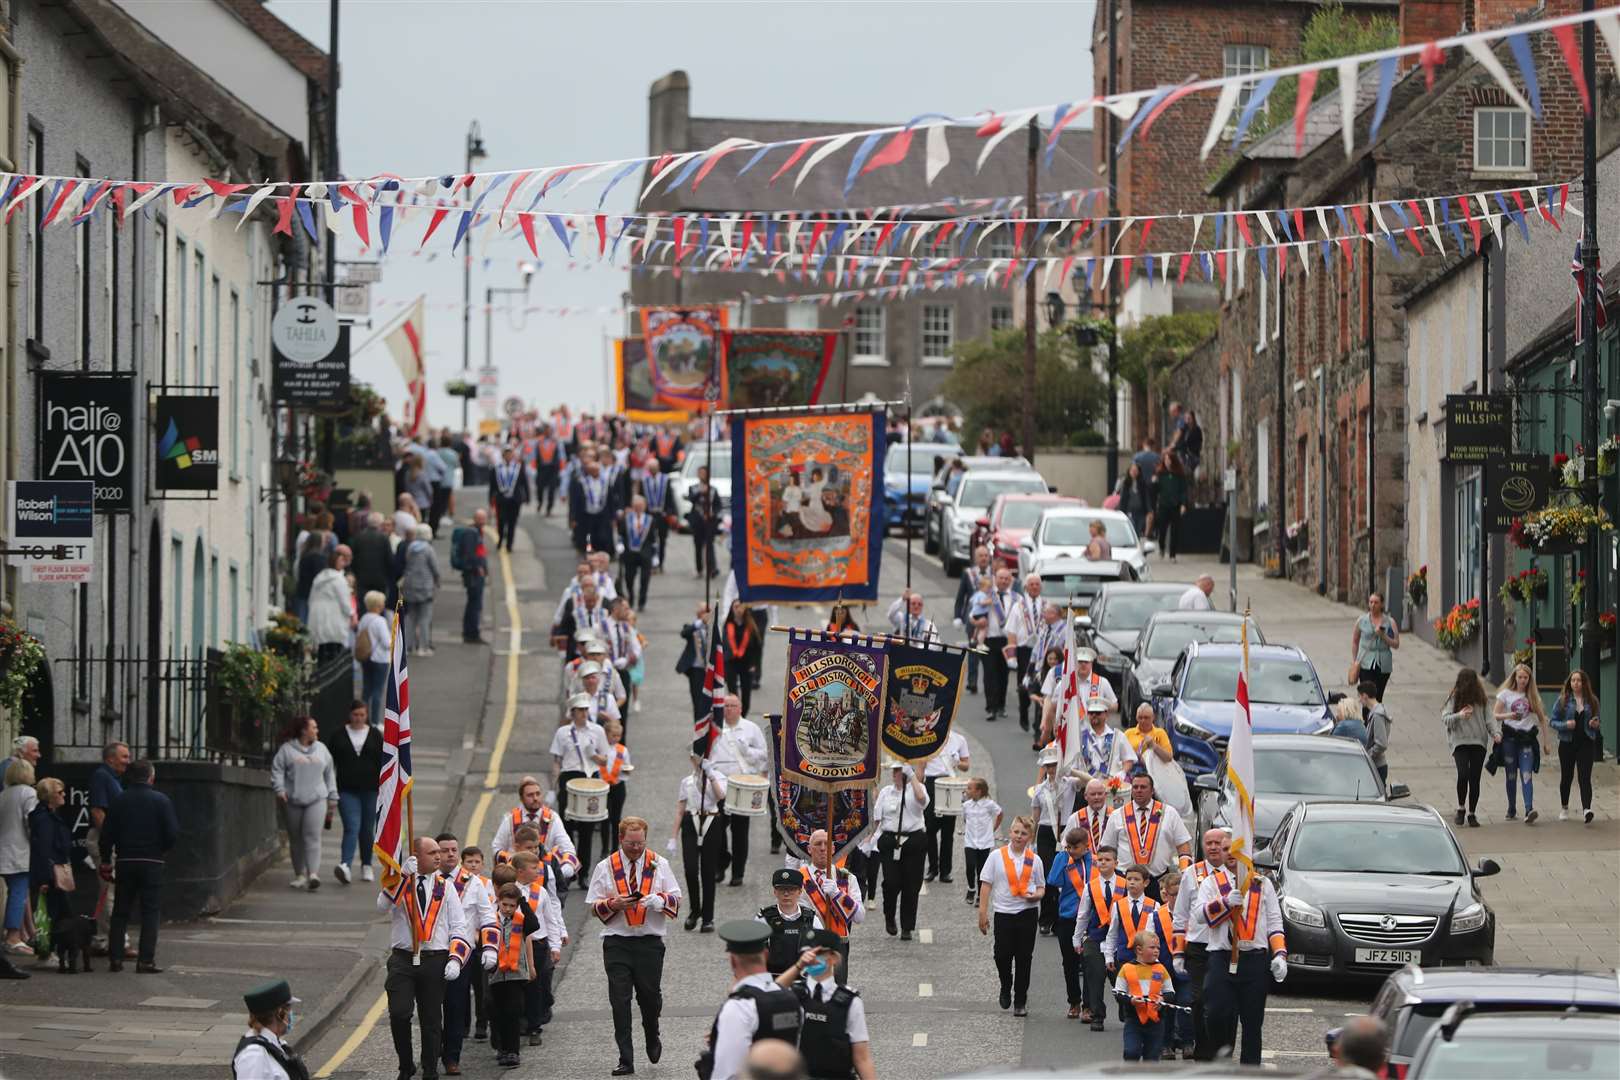 The Orange Order parade in the village of Hillsborough, Co Down, as part of the July 12 celebrations (Niall Carson/PA)